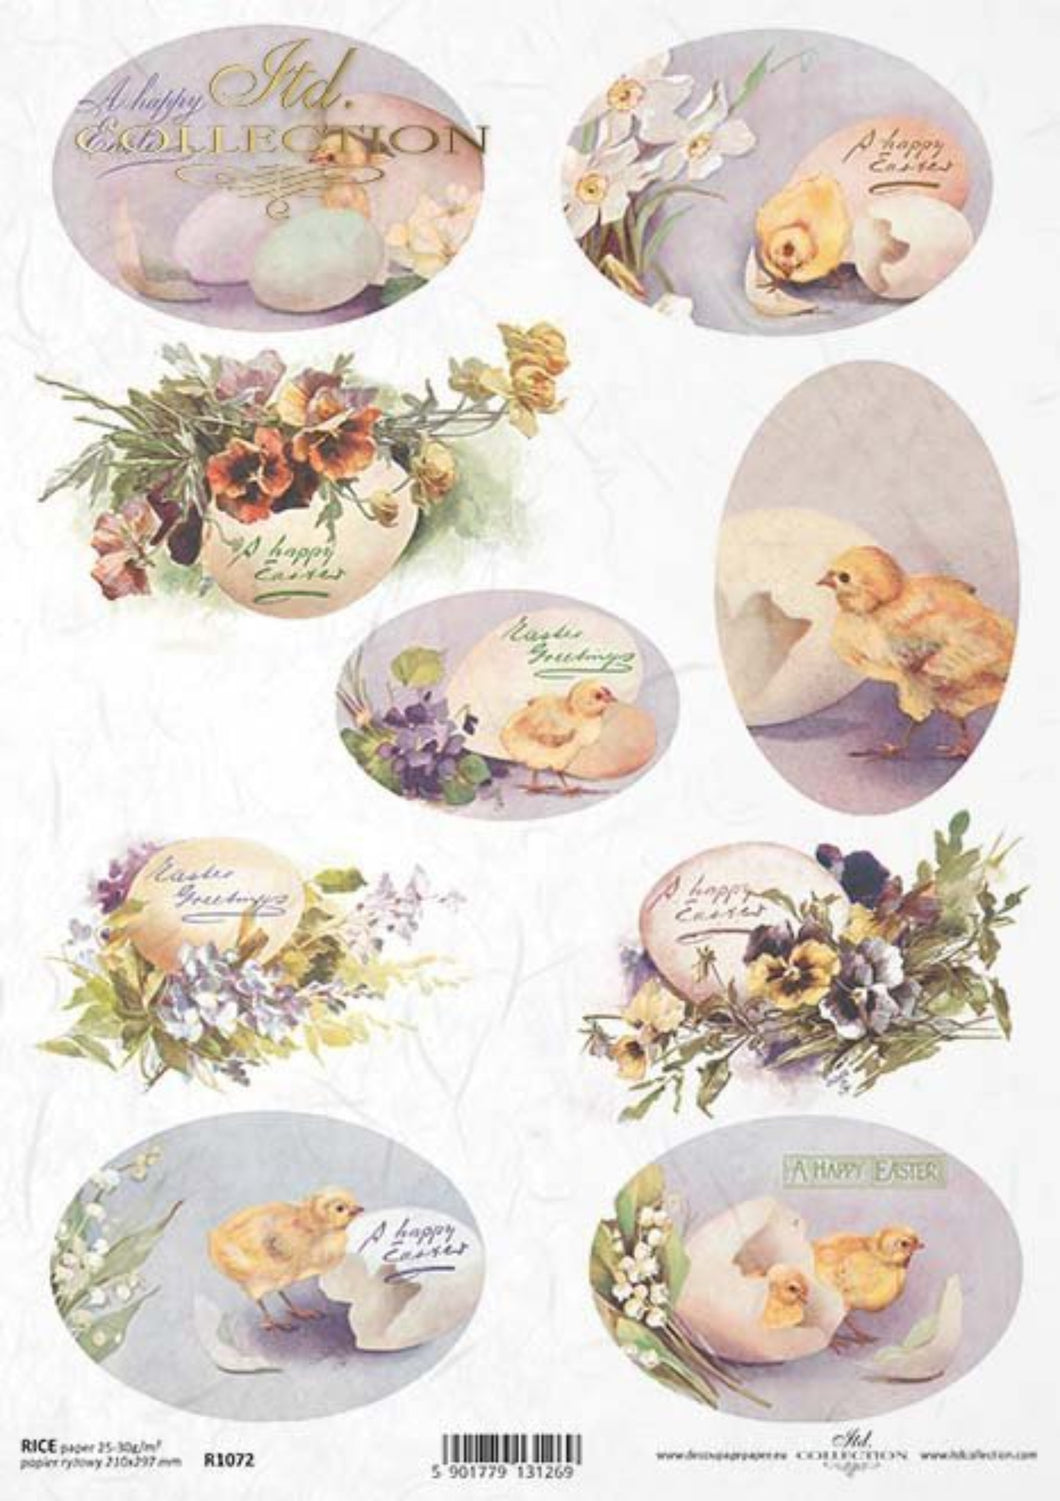 Happy Easter Egg Chicks Rice Paper by ITD Collection, R1072, A4